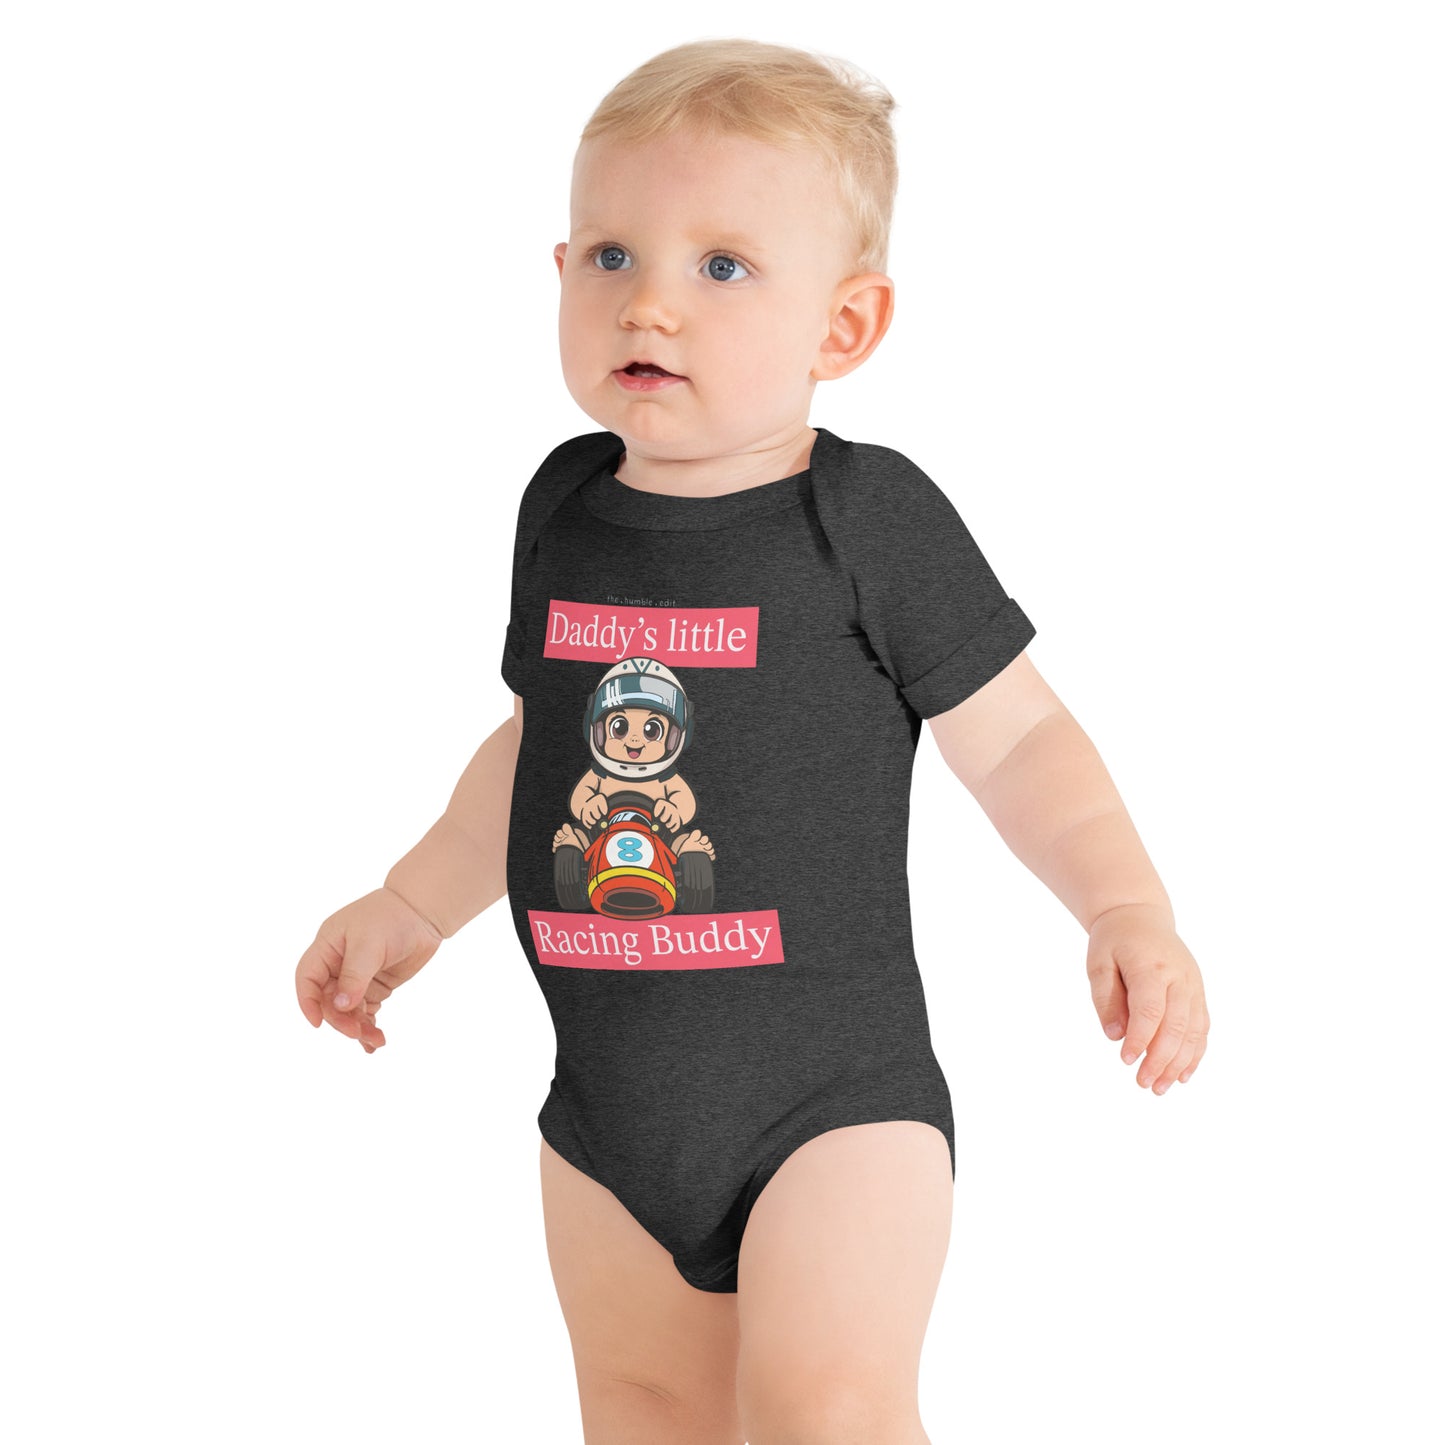 Daddy's Little Racing Buddy - Baby Short Sleeve One Piece